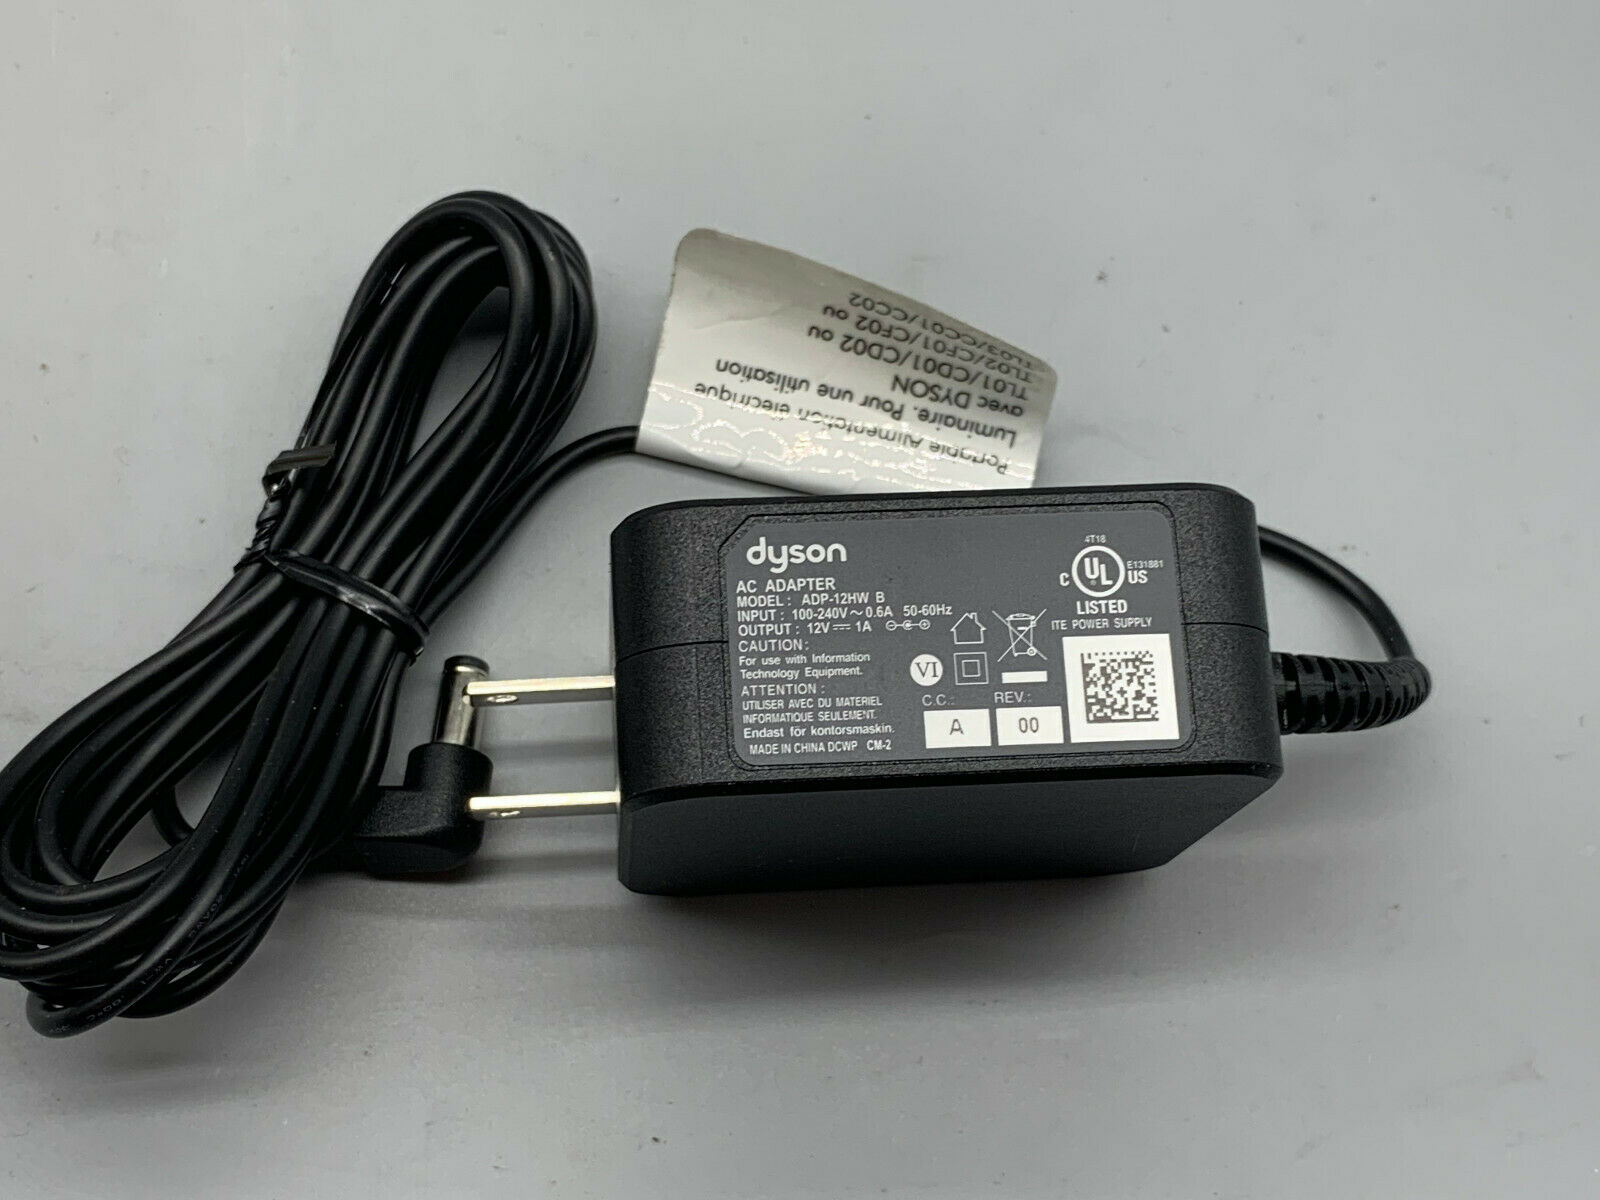 New 12V 1A Dyson AC Adapter Power Supply ADP-12HW B FOR PORTABLE LUMINAIRE - Click Image to Close